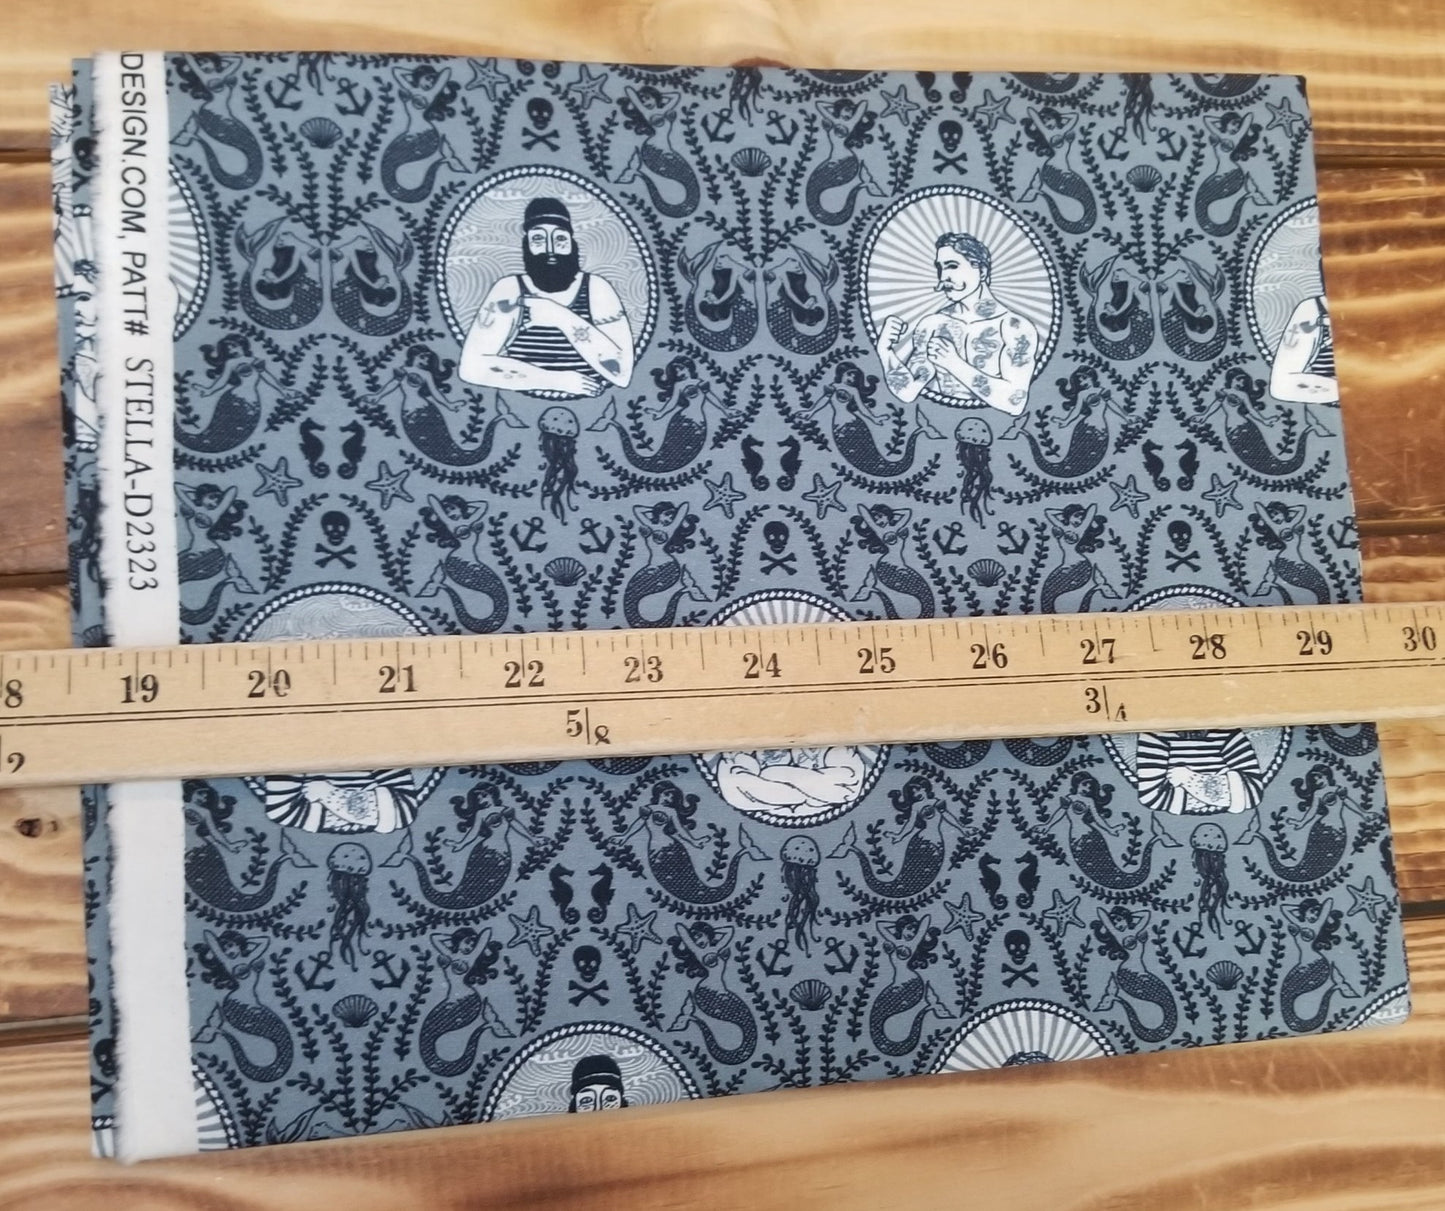 End of Bolt 1 yard case pack: 1 piece of Quilting Cotton Dear Stella Sailor Portraits (1 yard cuts)- As pictured